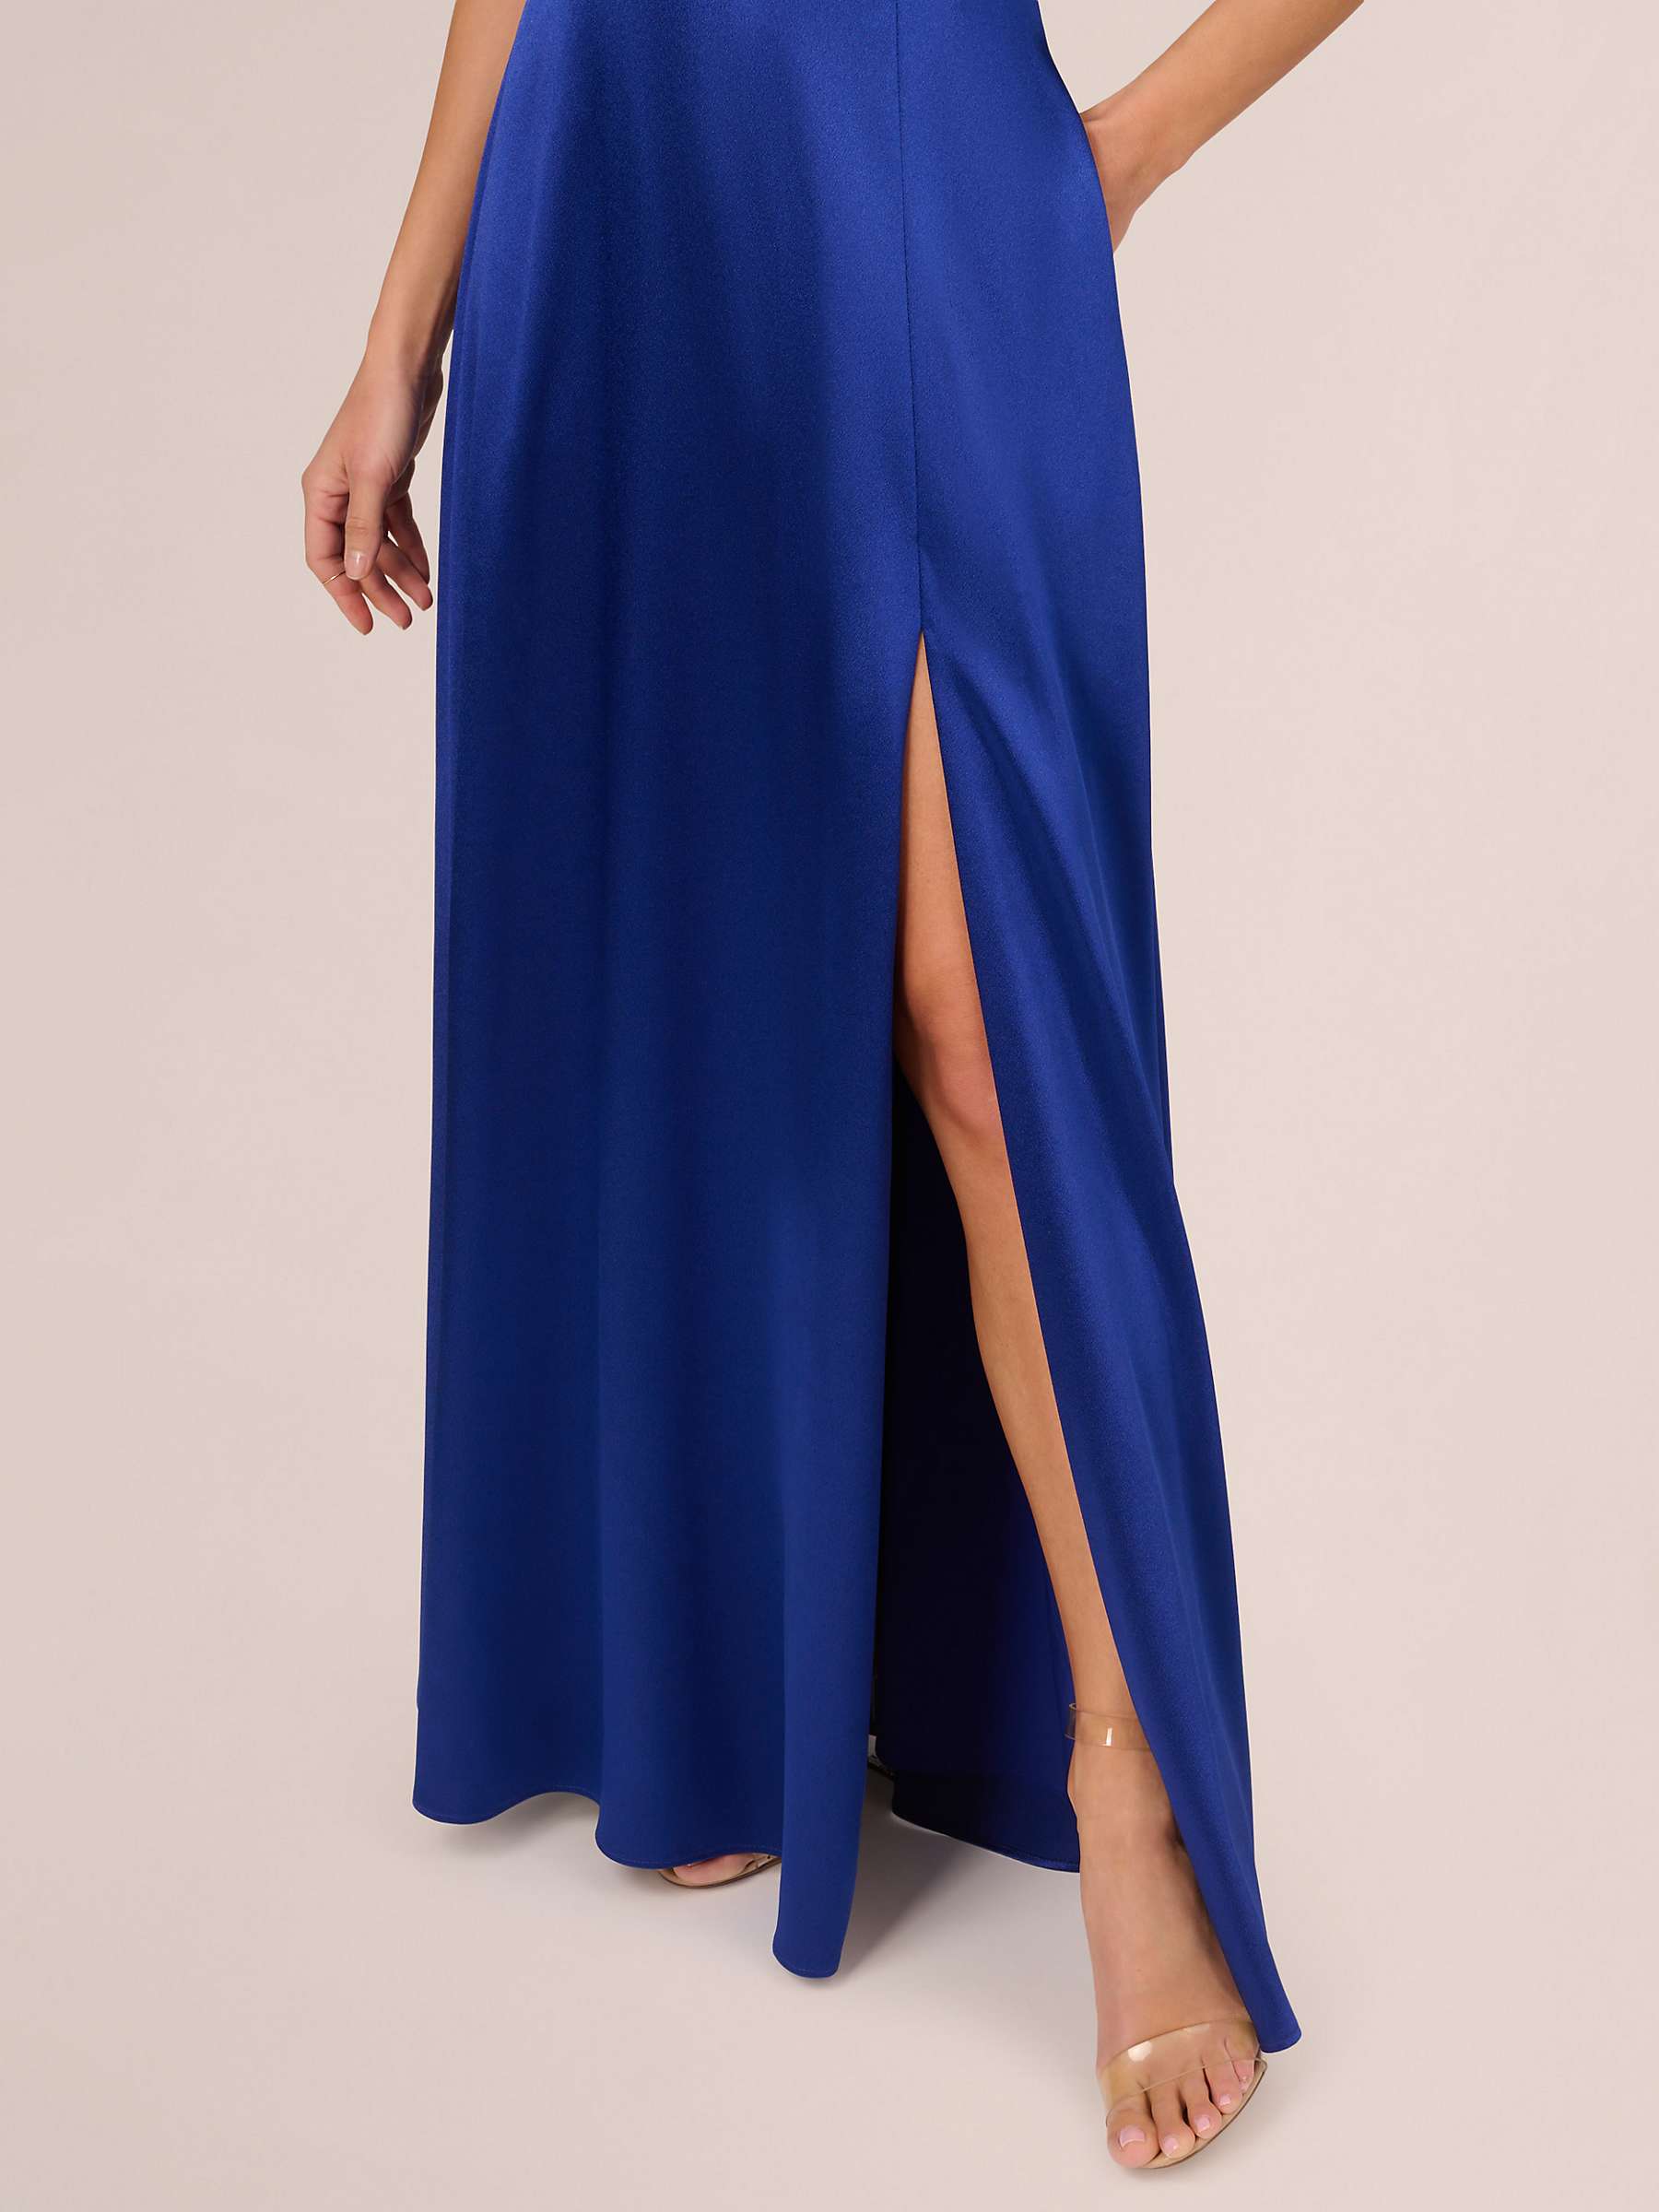 Buy Adrianna By Adrianna Papell Liquid Satin Maxi Dress, Royal Sapphire Online at johnlewis.com